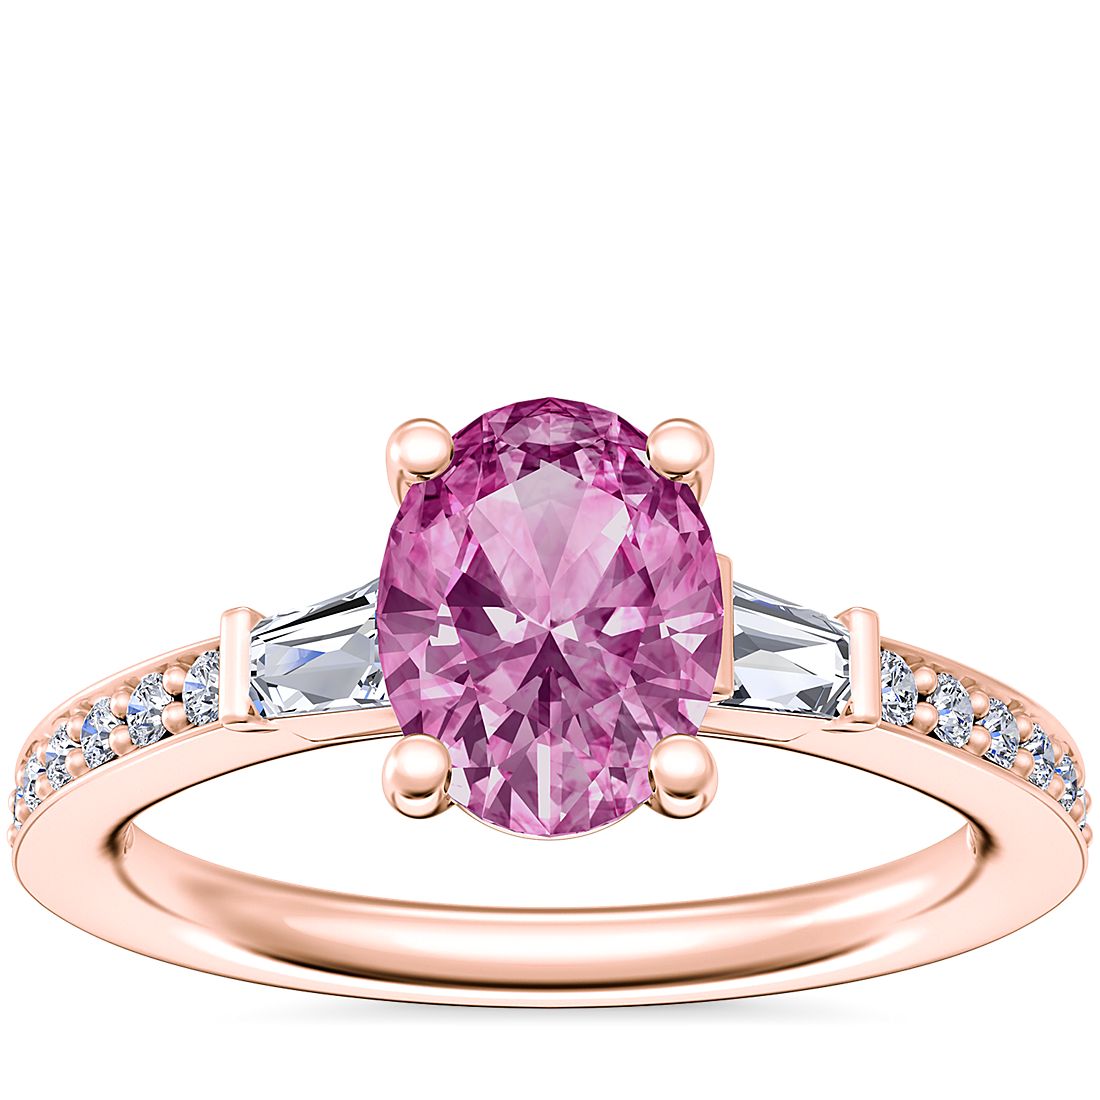 Tapered Baguette Diamond Cathedral Engagement Ring with Oval Pink Sapphire in 14k Rose Gold (8x6mm)